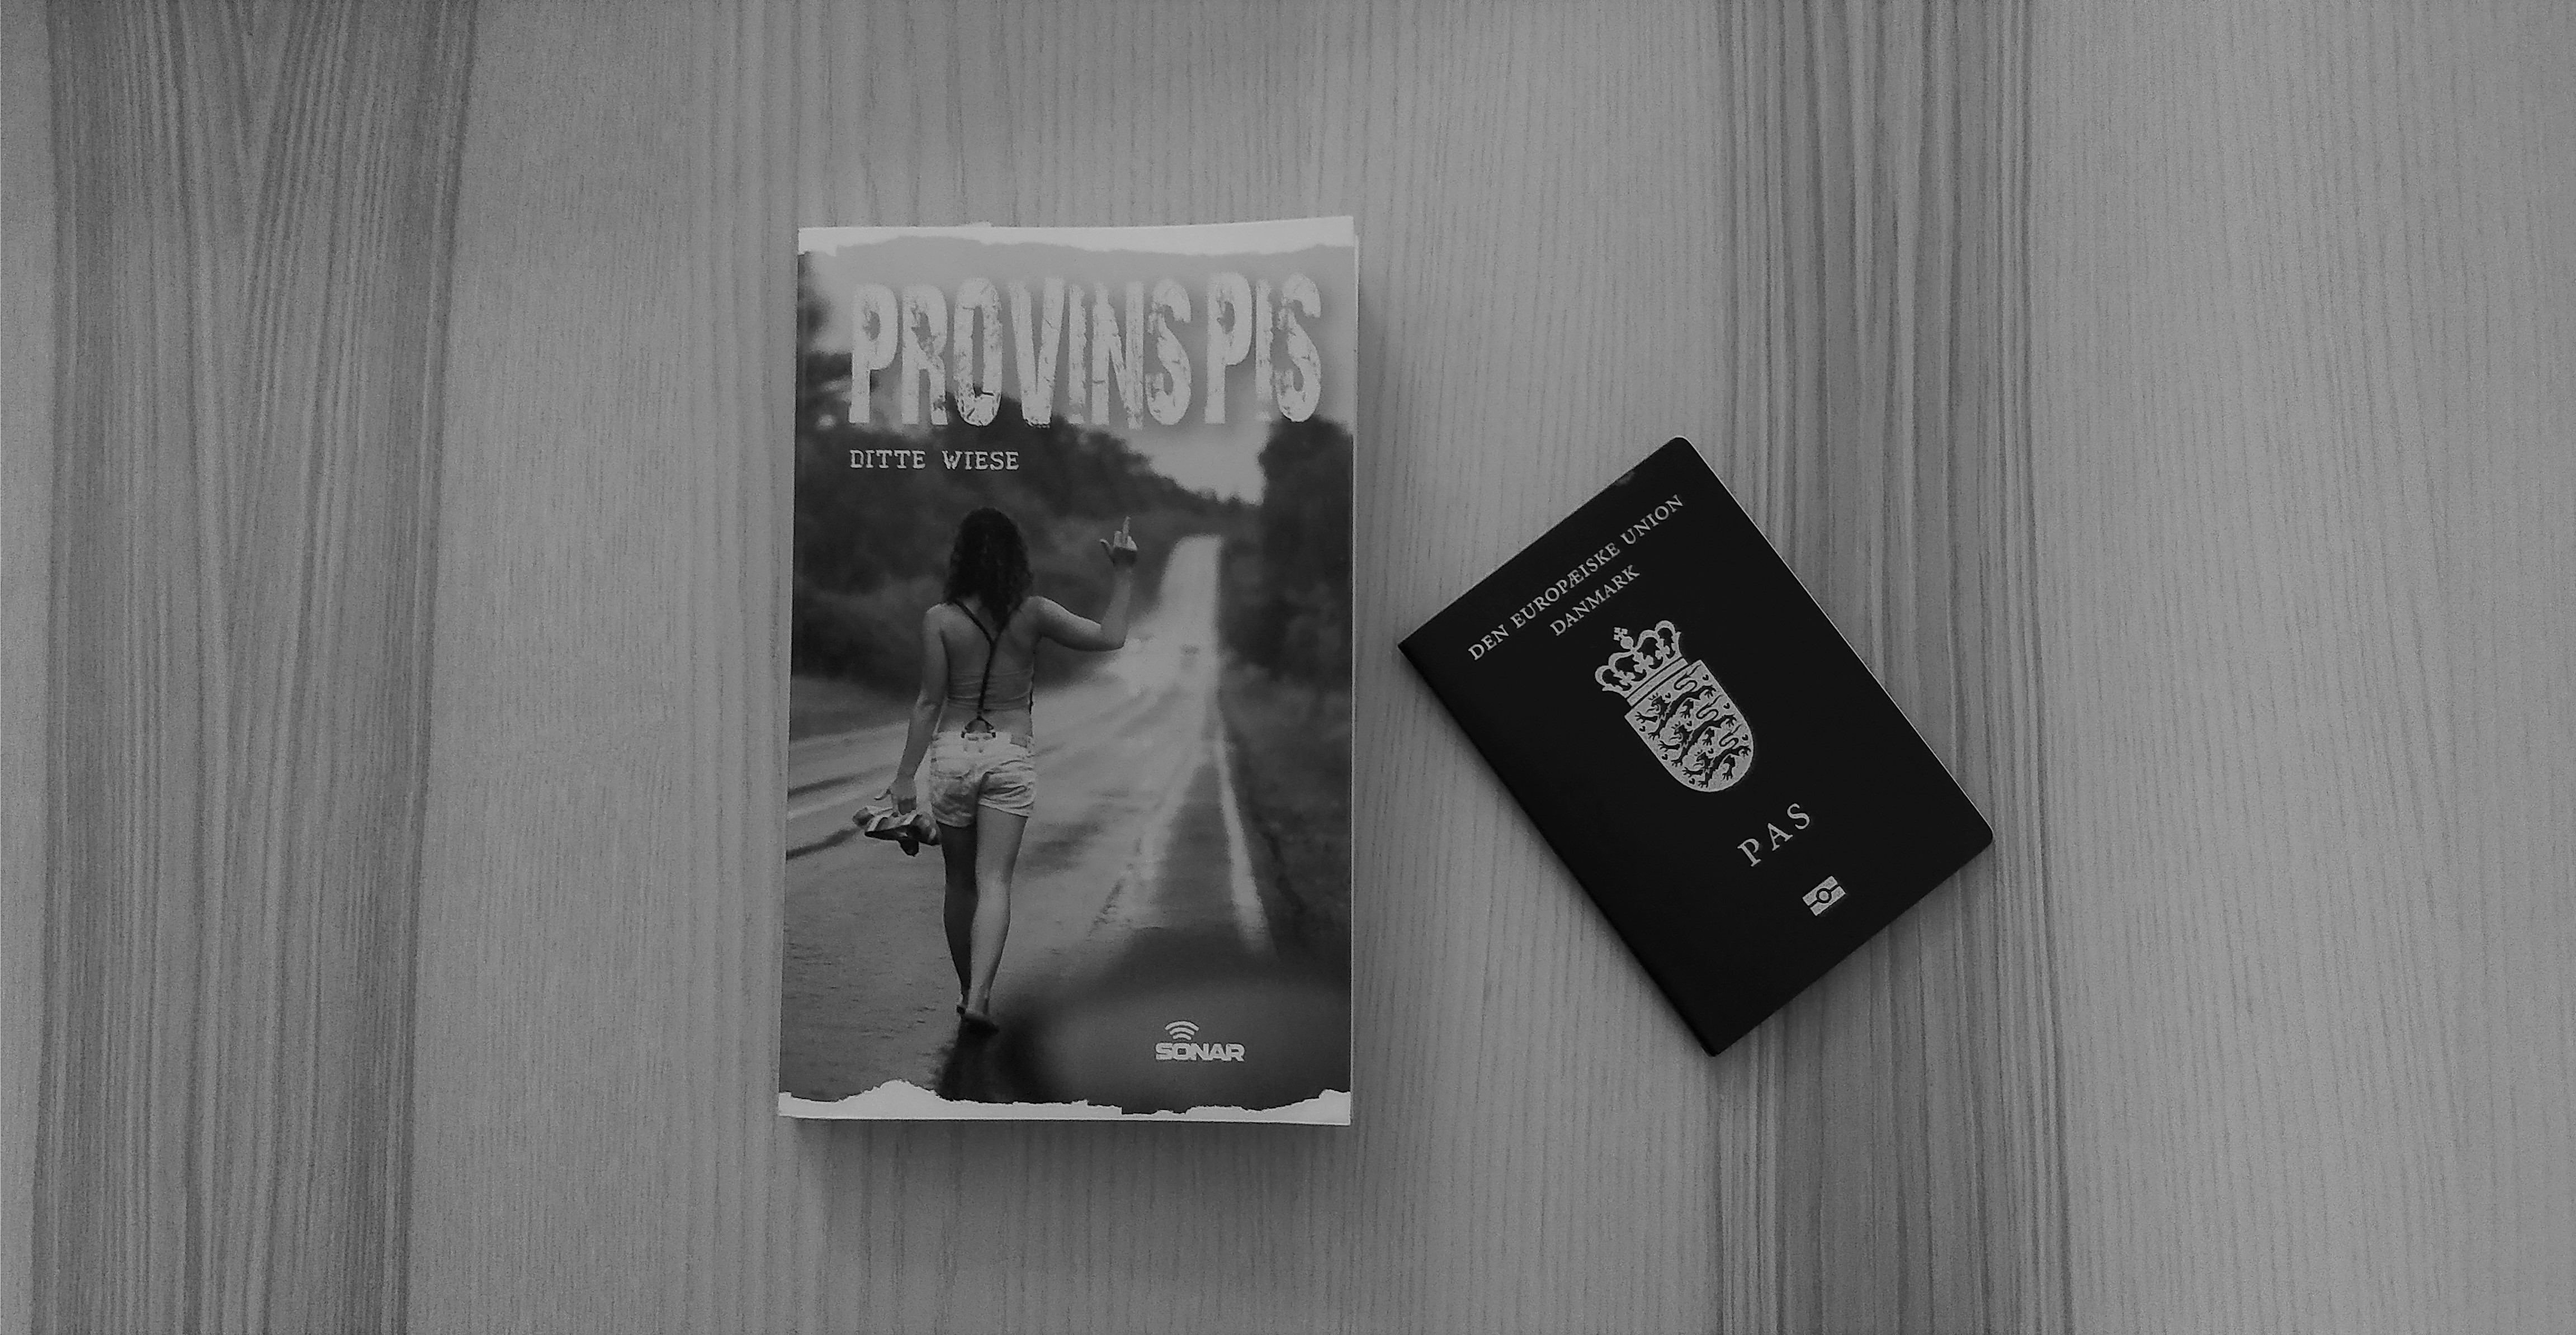 The book Provinspis on a table next to a passport.